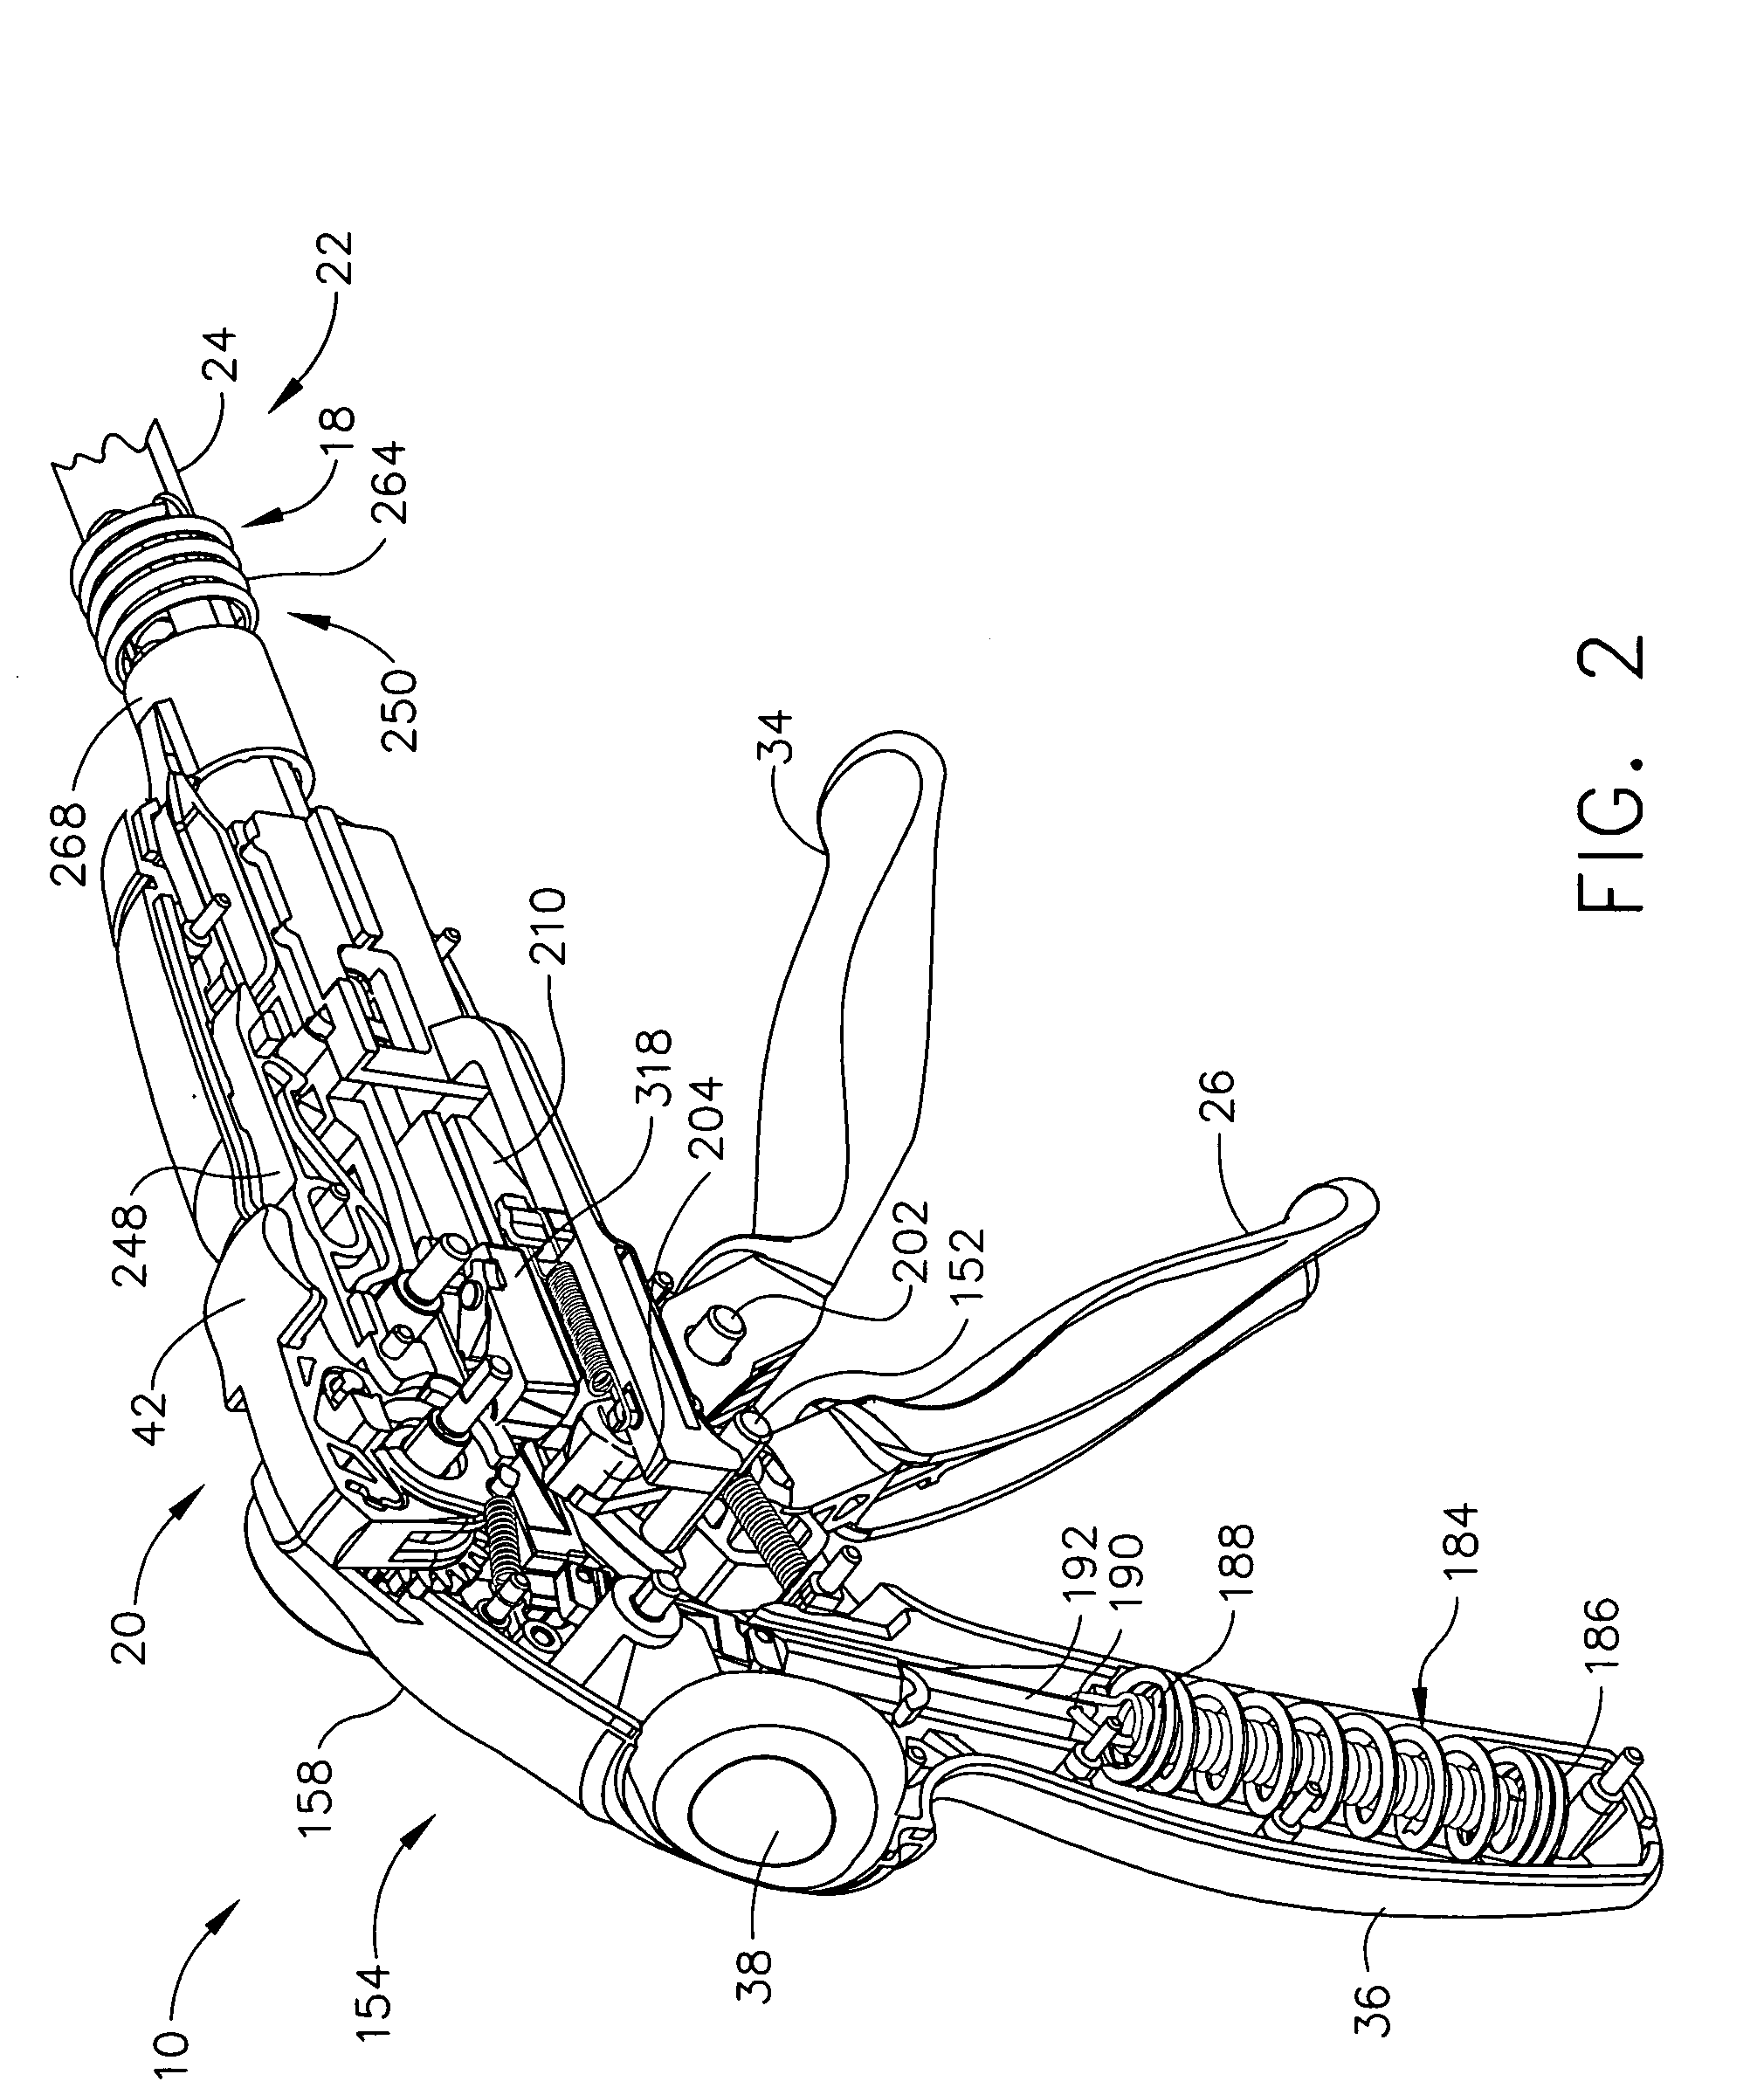 Surgical instrument incorporating EAP blocking lockout mechanism